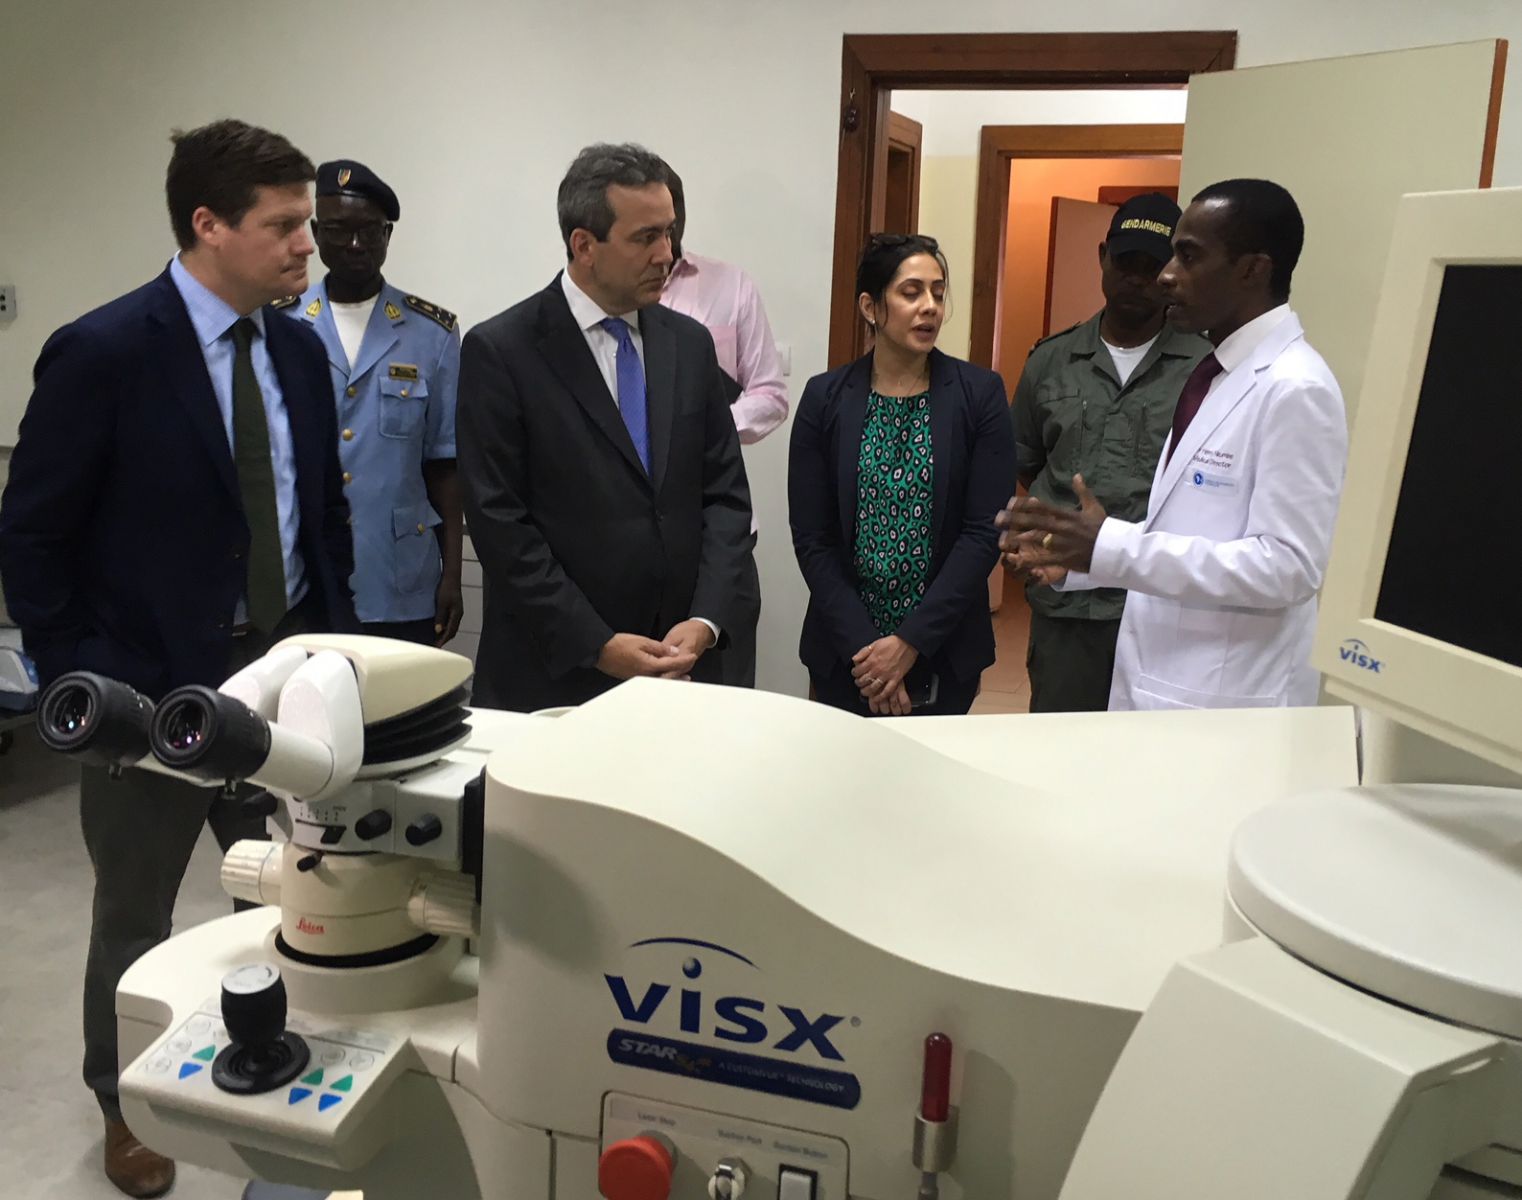 Photo, OPIC delegation tours medical facility, OPIC, Overseas Private Investment Corporation, Magrabi ICO Cameroon Eye Institute, MICEI, Enry Nkumbe, cataract surgery, prevent blindness, public diplomacy, impact investing, eye care